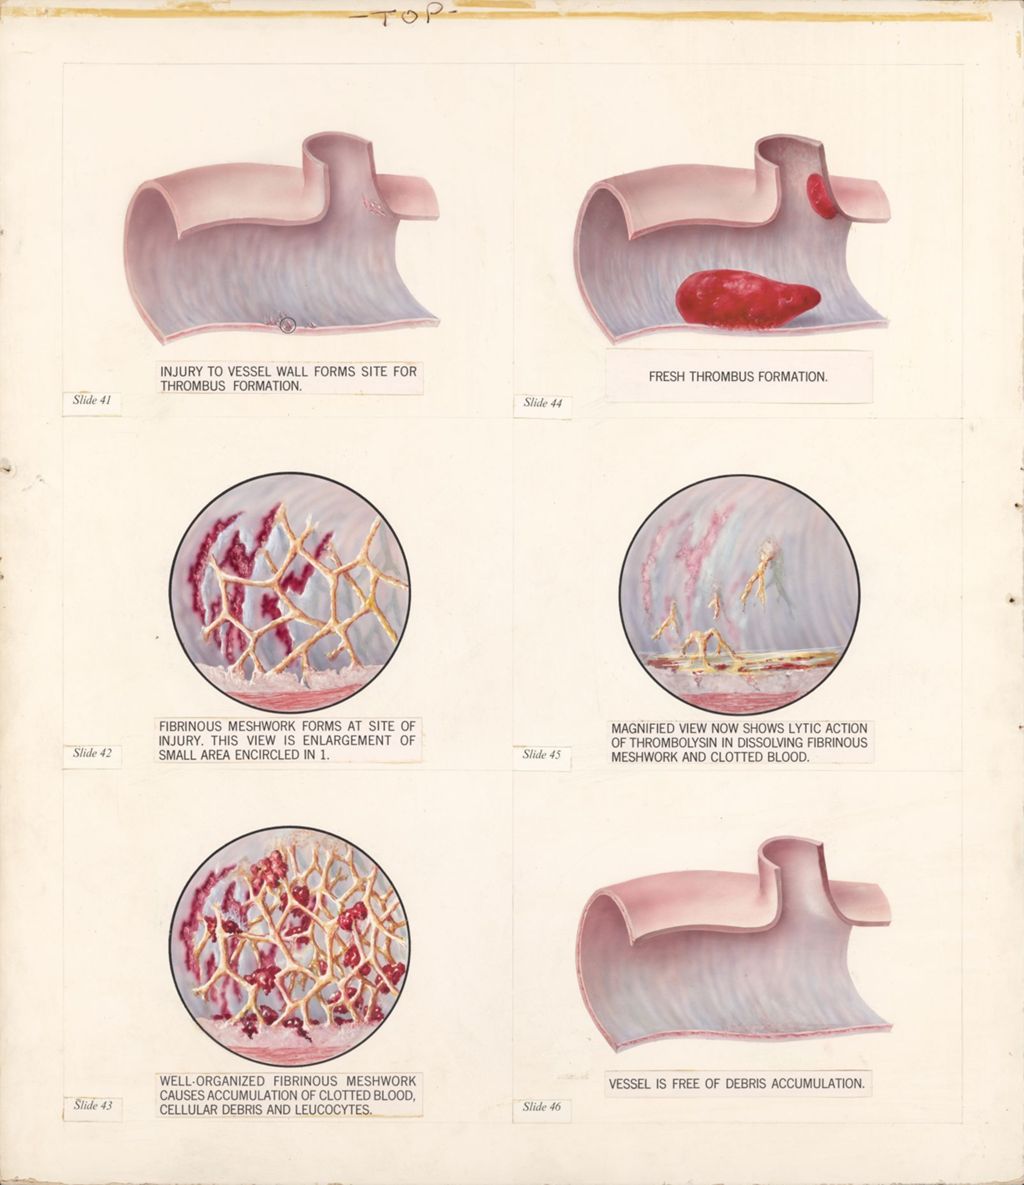 Miniature of Thrombolysin training film, Six progressive steps in development of thrombus and its prevention through the lytic action of Thrombolysin